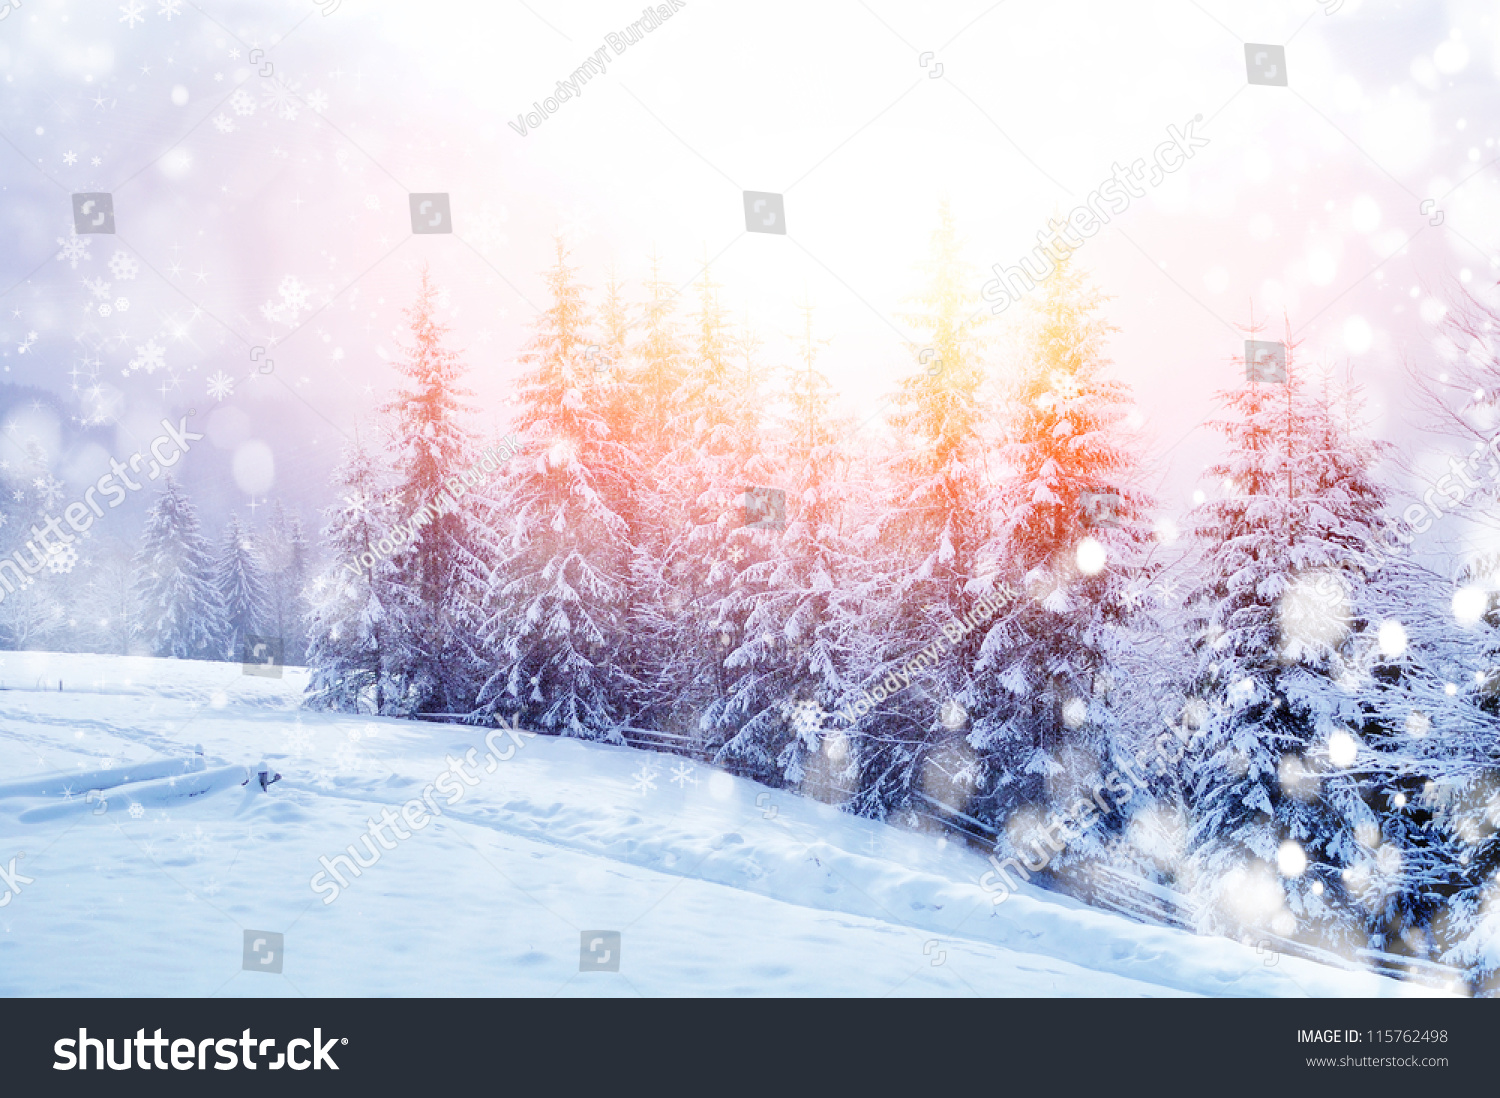 Beautiful winter landscape with snow covered trees #115762498